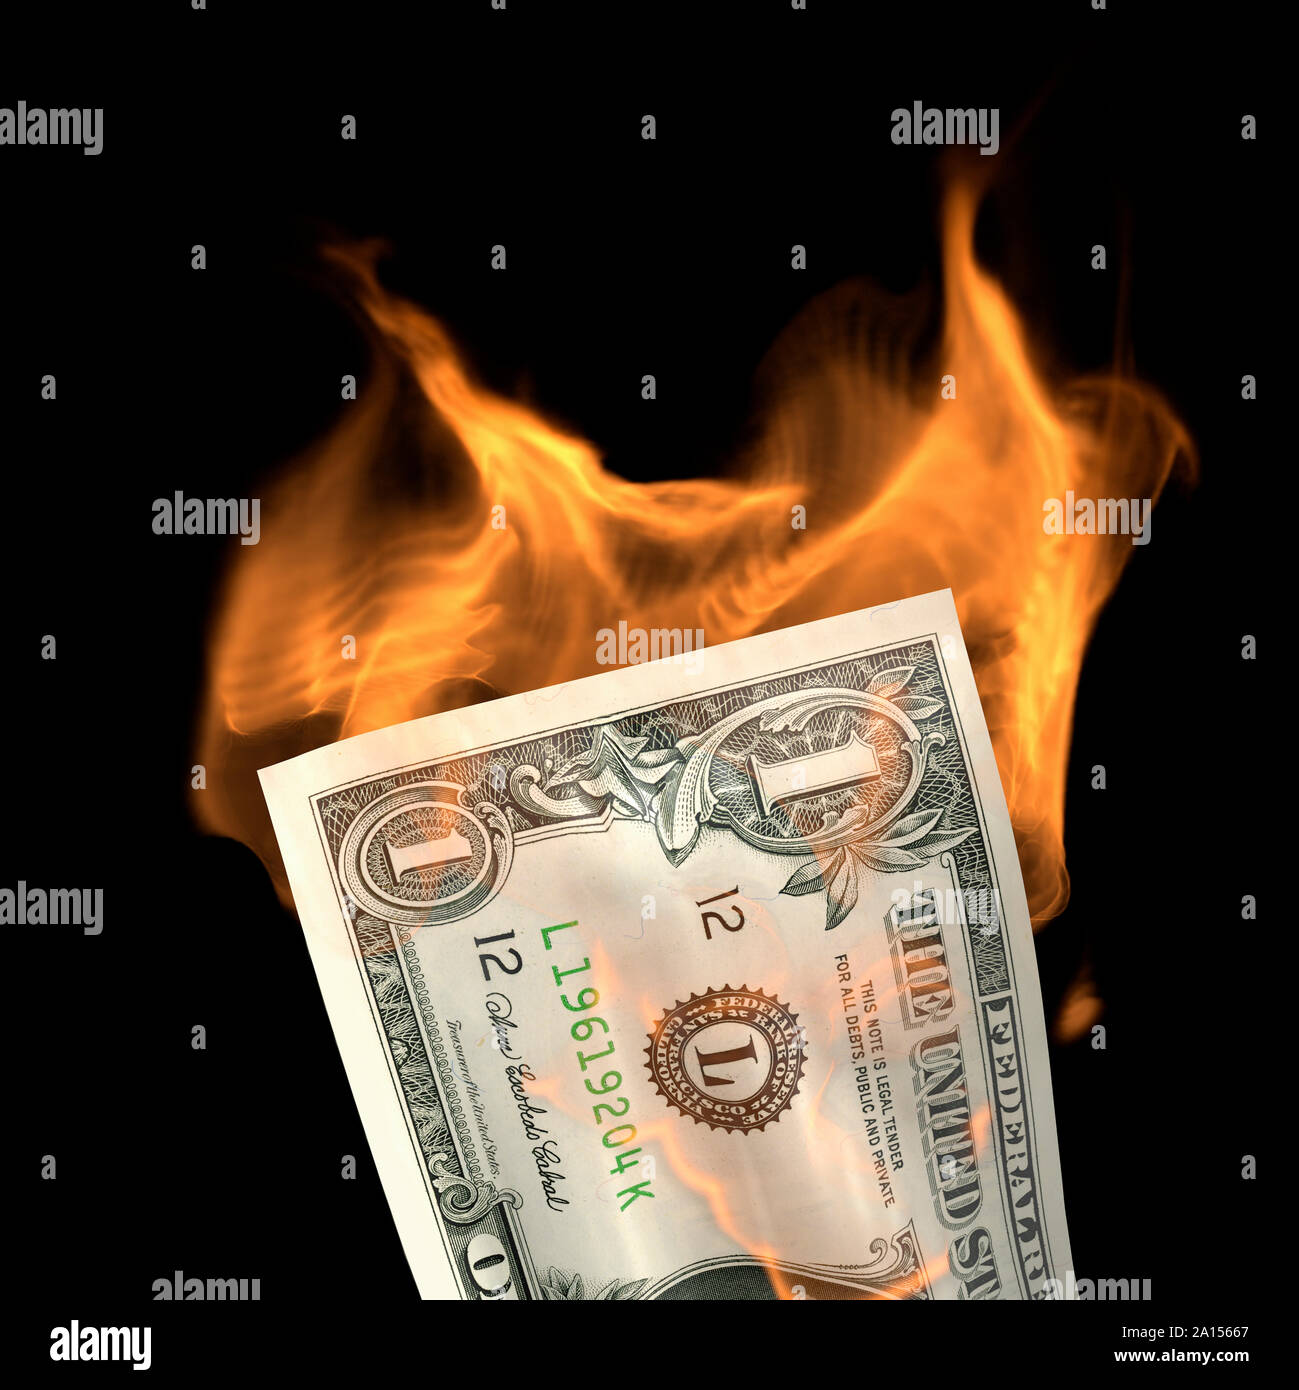 One dollar bill banknote on fire Stock Photo